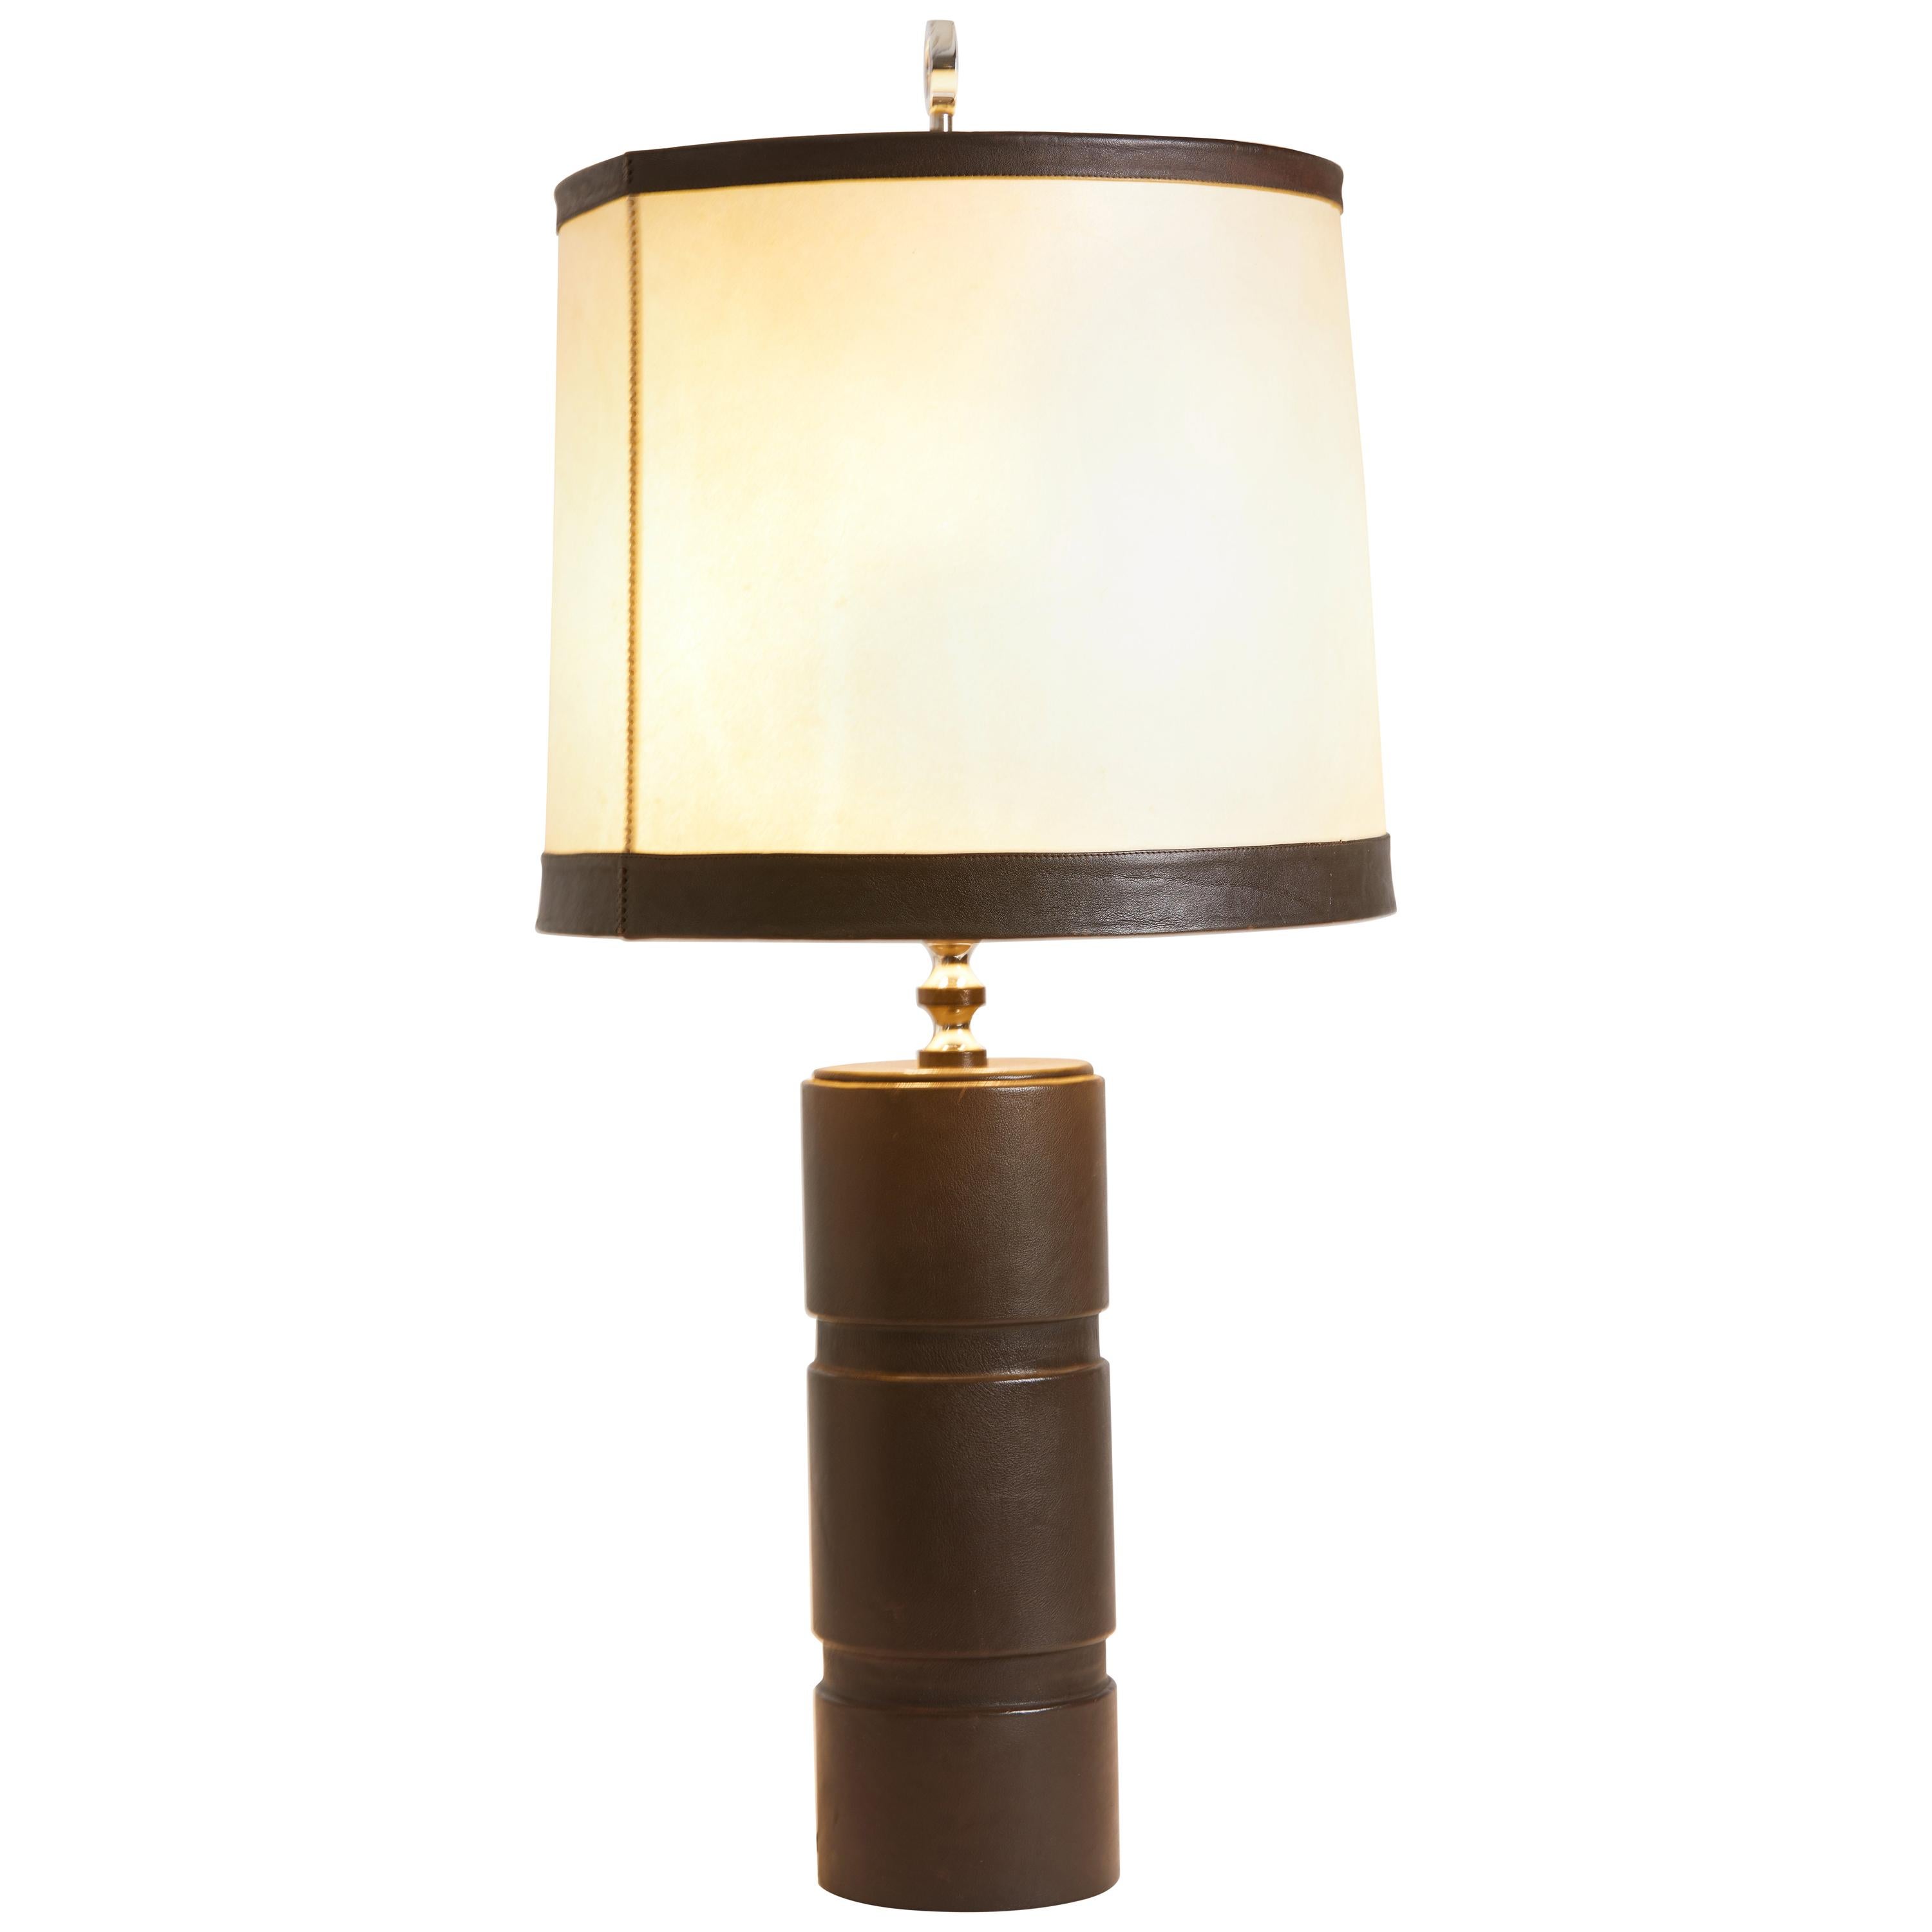 1970s French Leather Table Lamp with Chocolate Brown